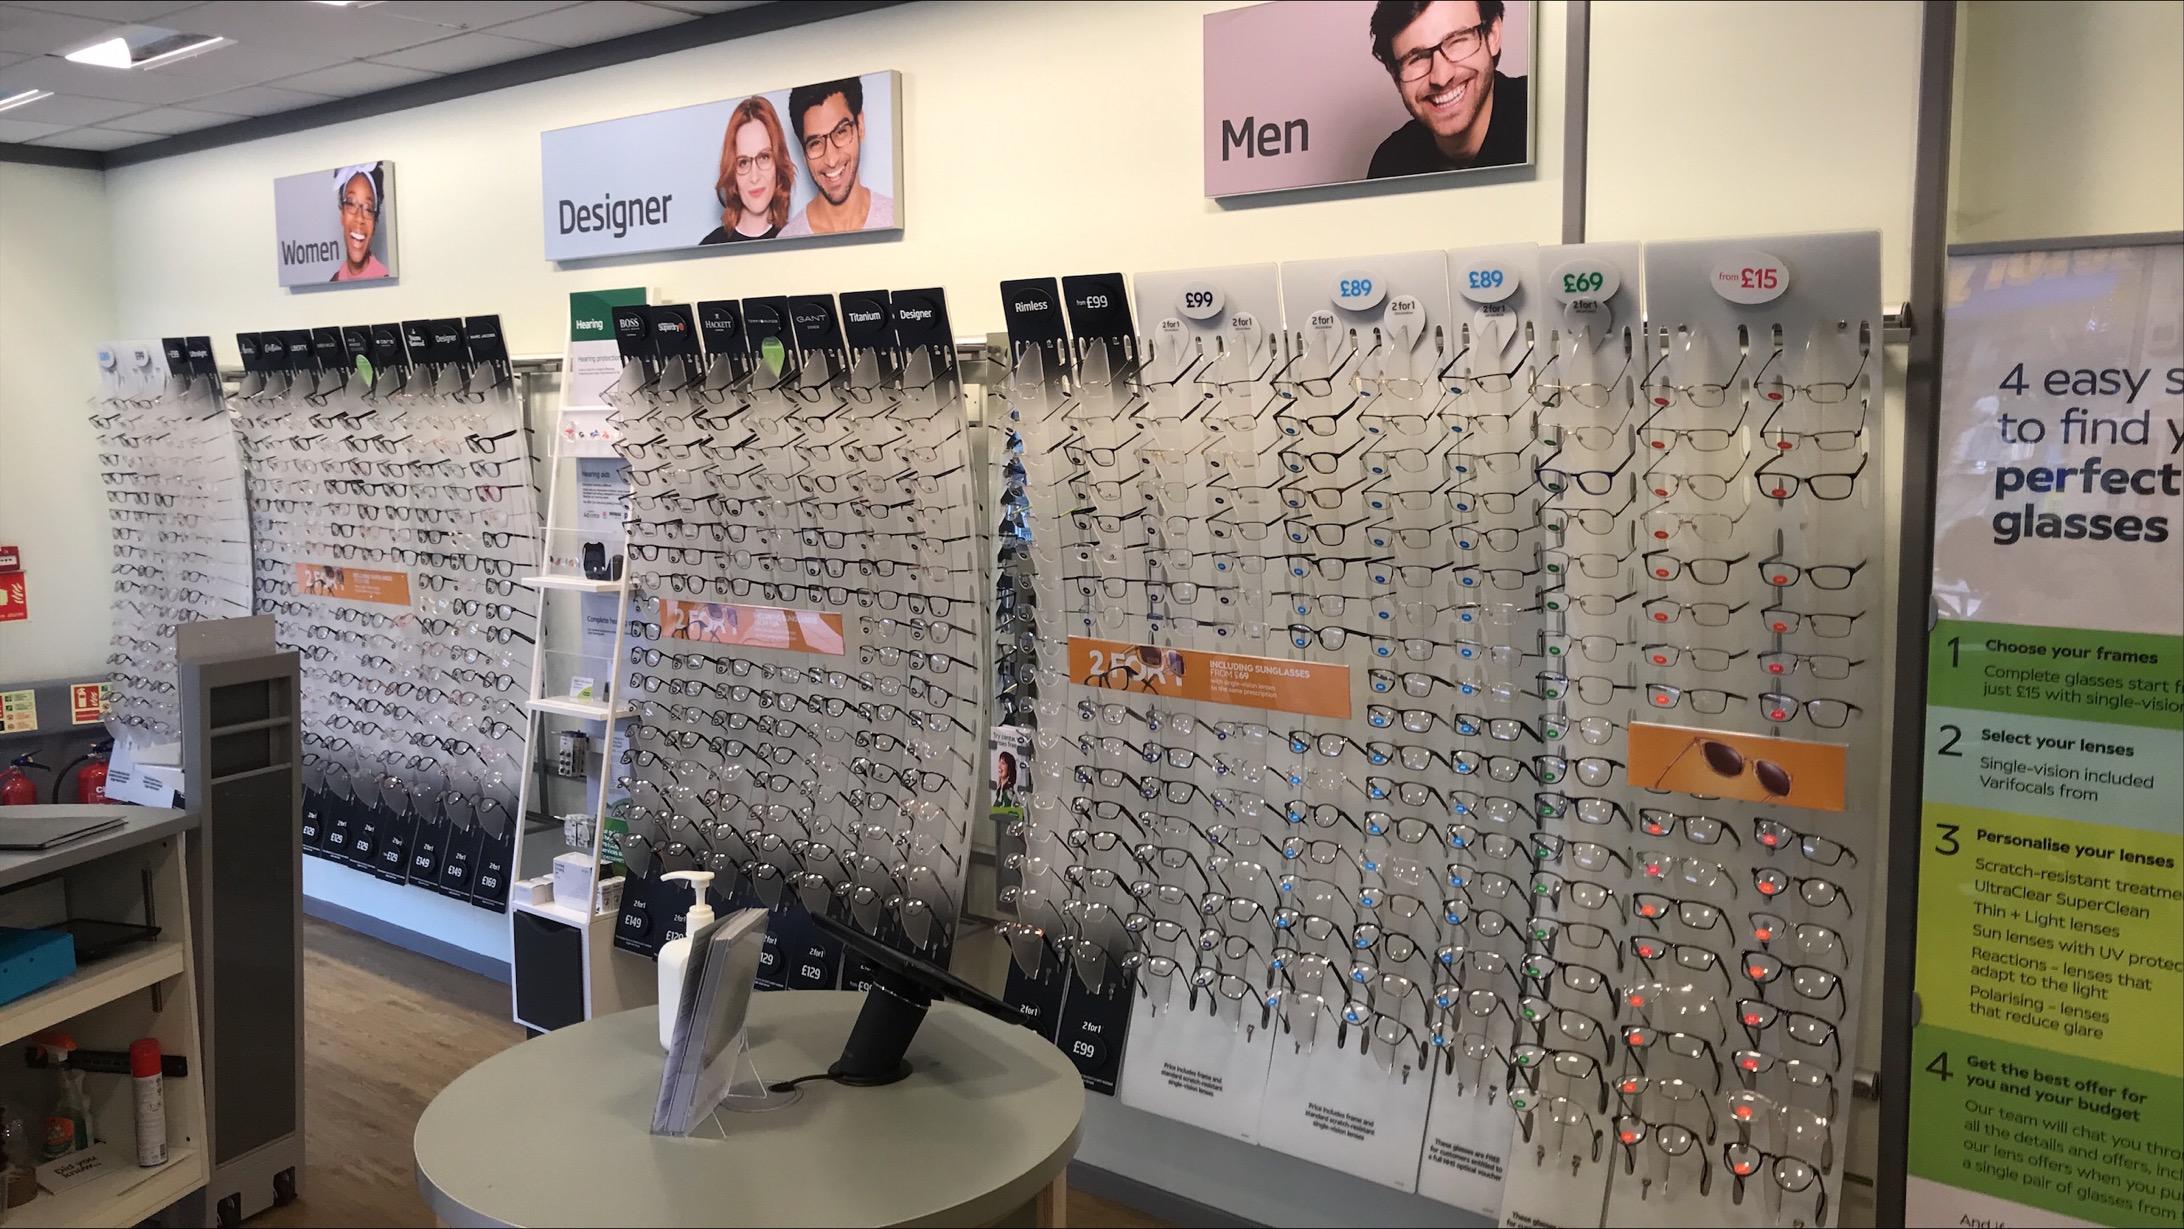 Specsavers Opticians and Audiologists - Leatherhead Specsavers Opticians and Audiologists - Leatherhead Leatherhead 01372 227740